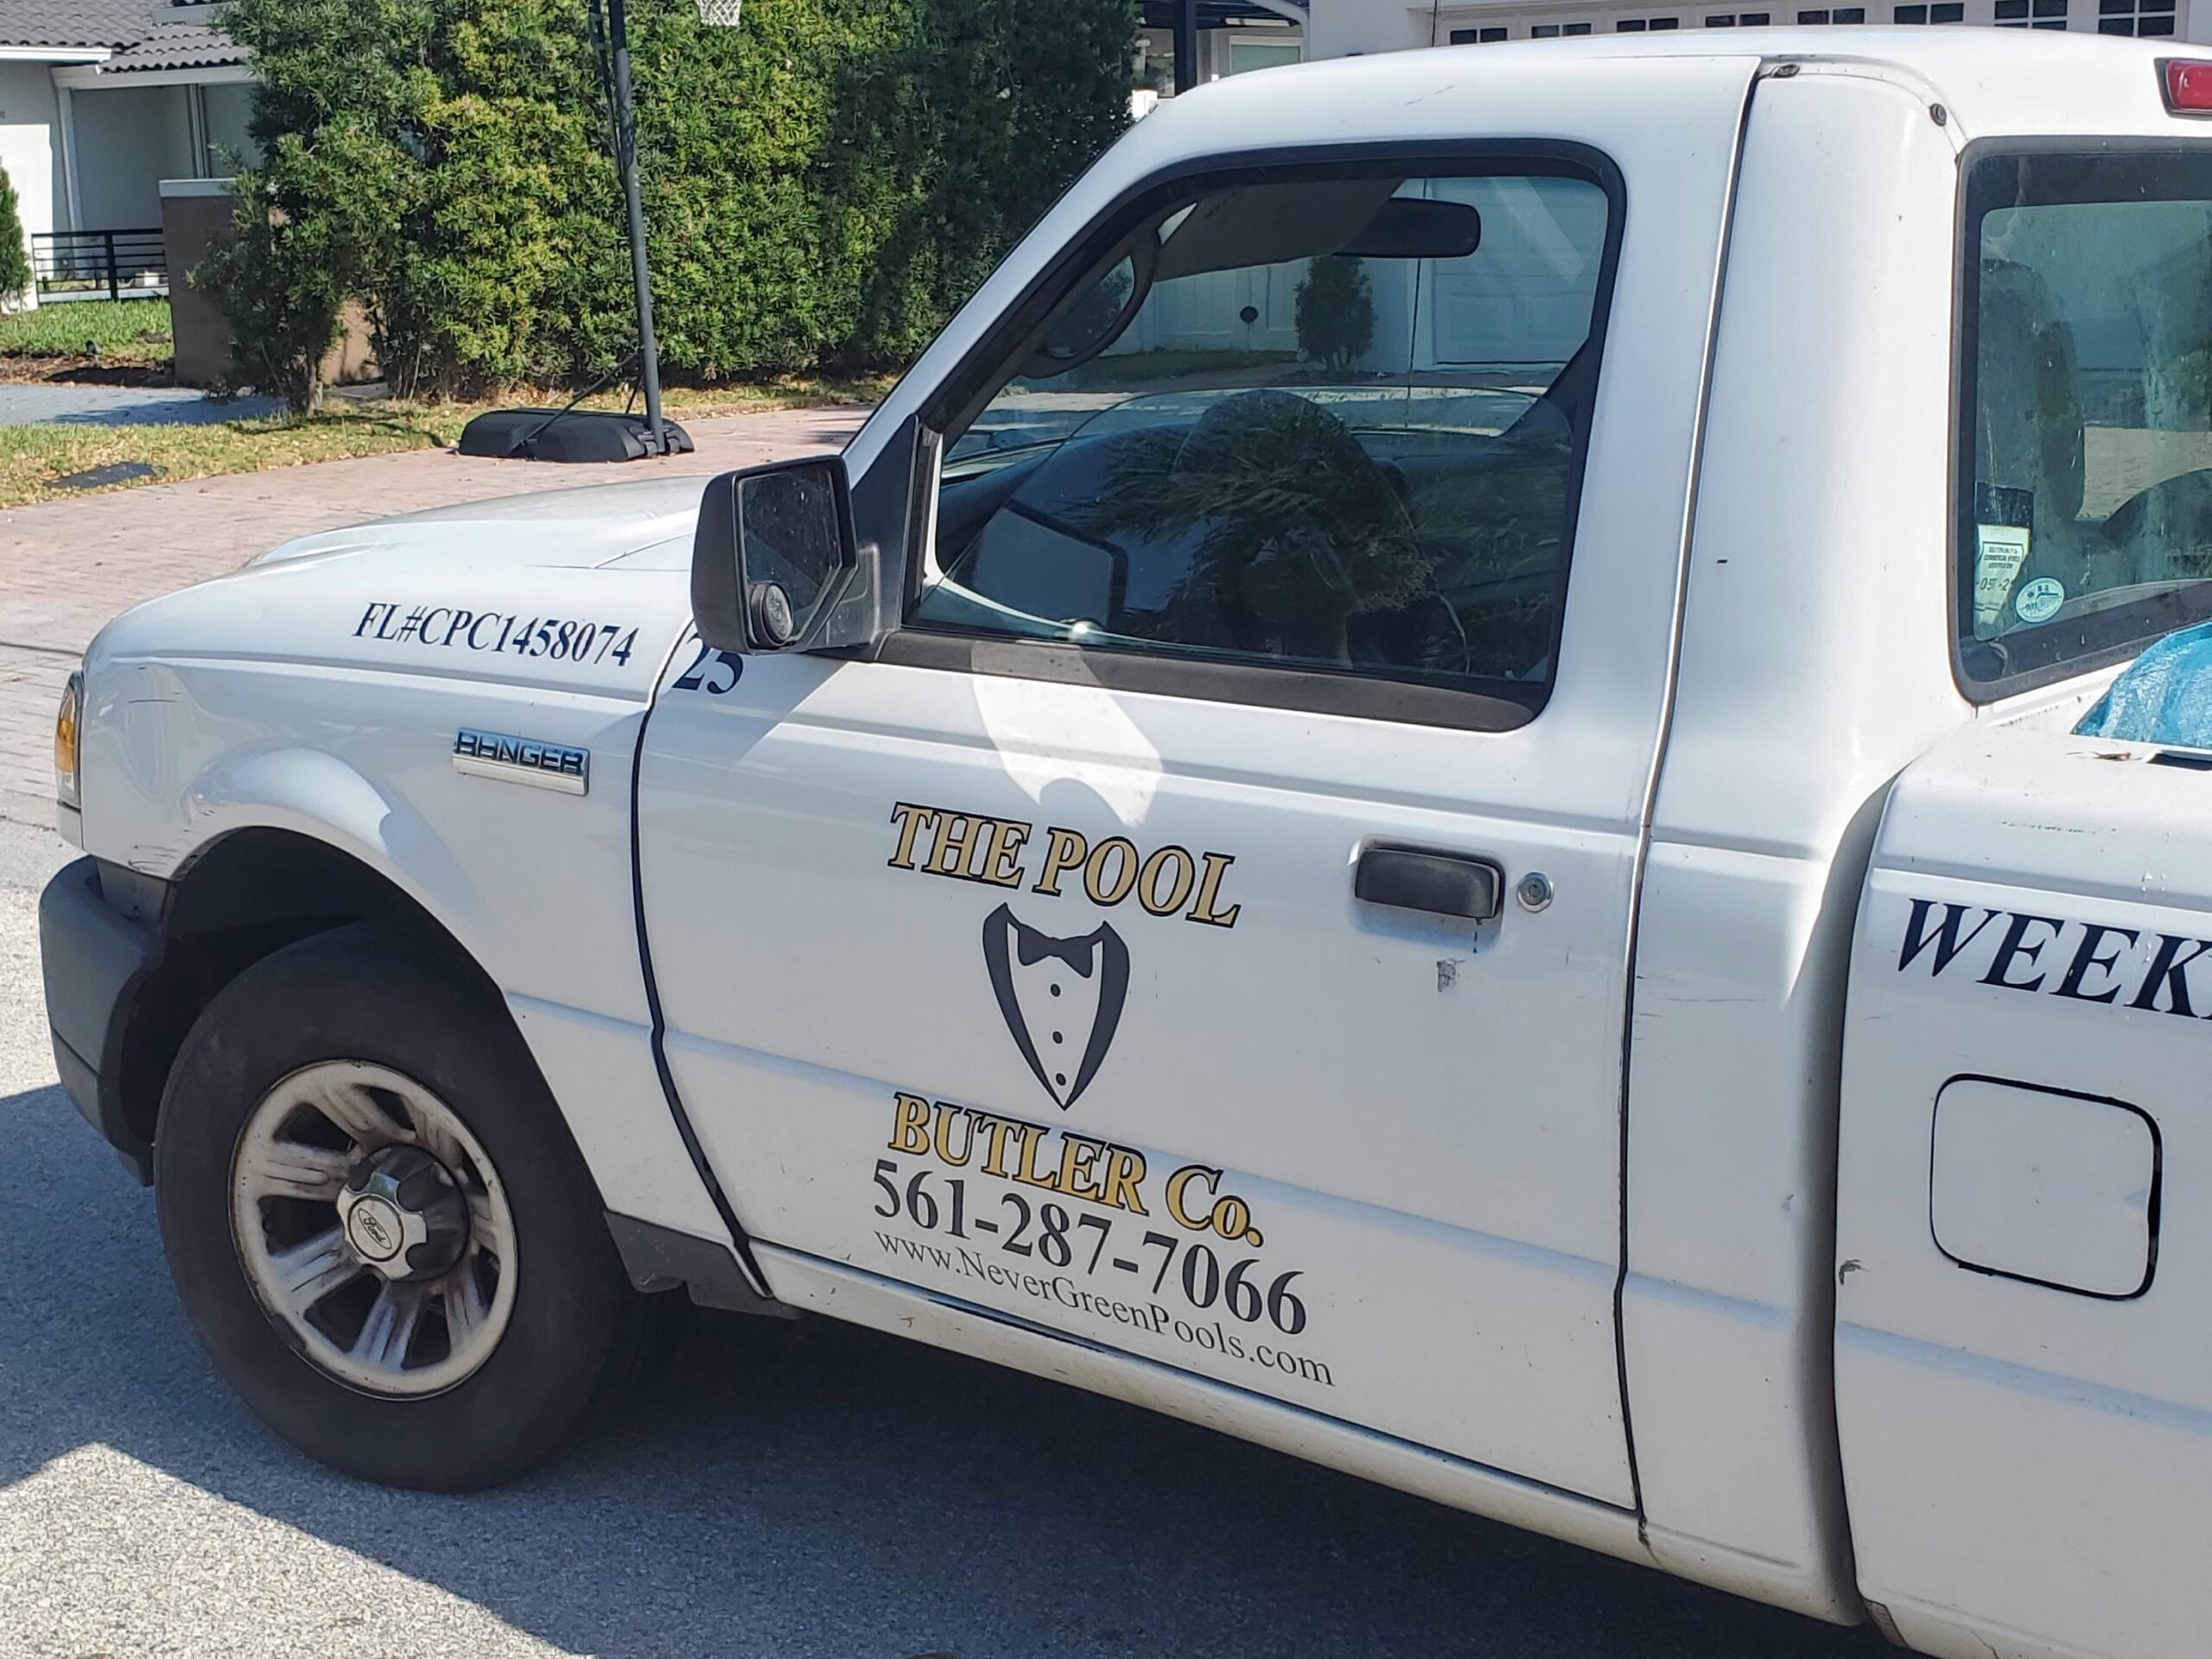 pool cleaning service truck